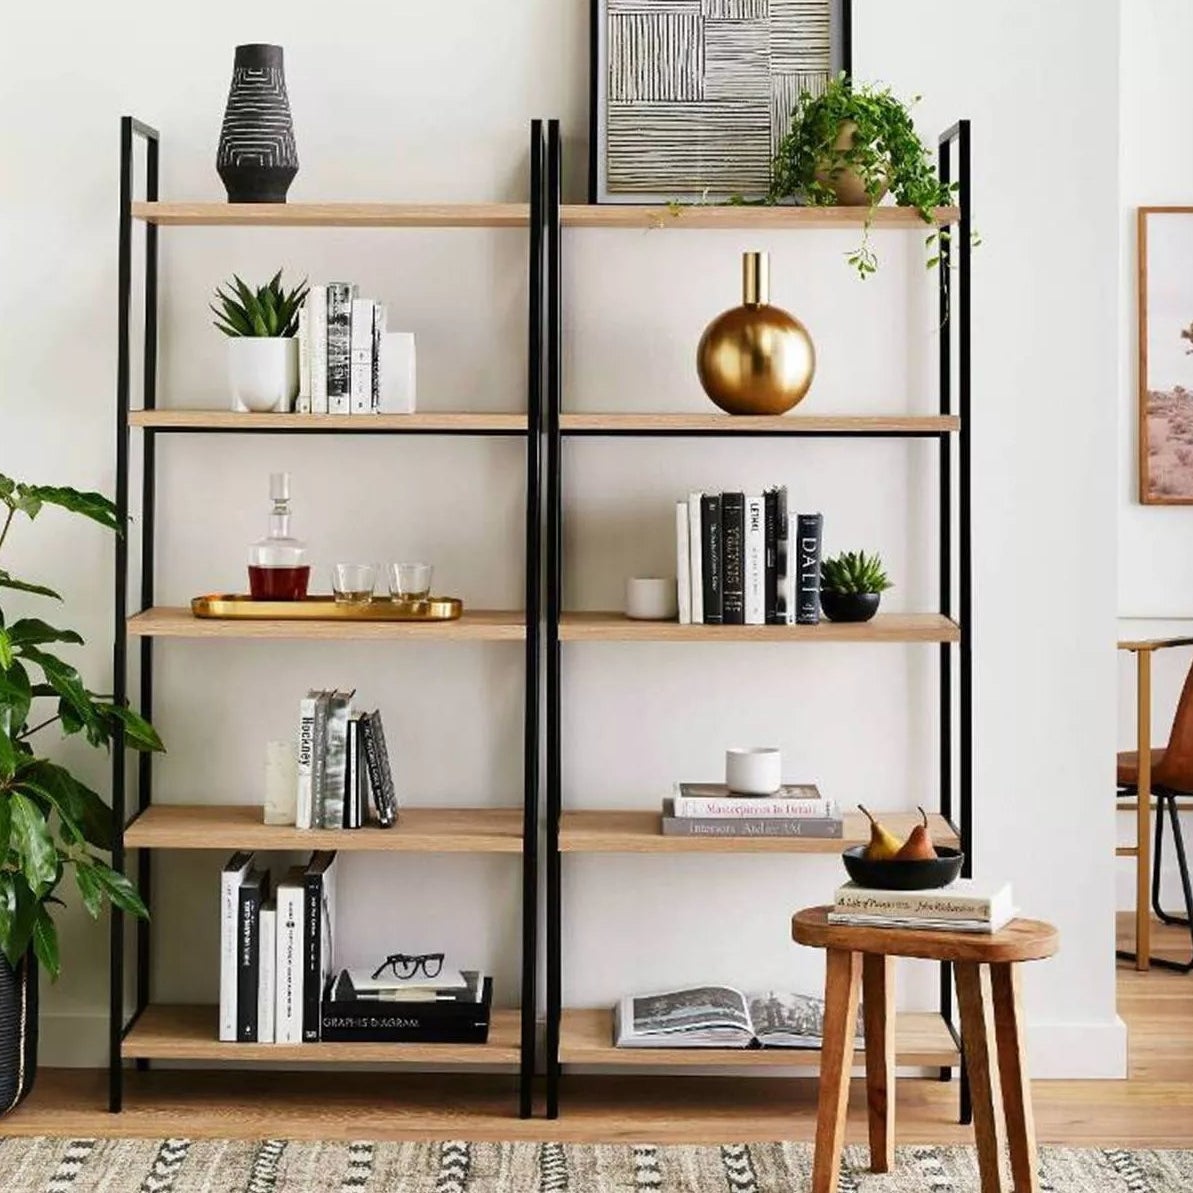 The ladder bookshelf with a metal frame and light wooden shelves in a living room